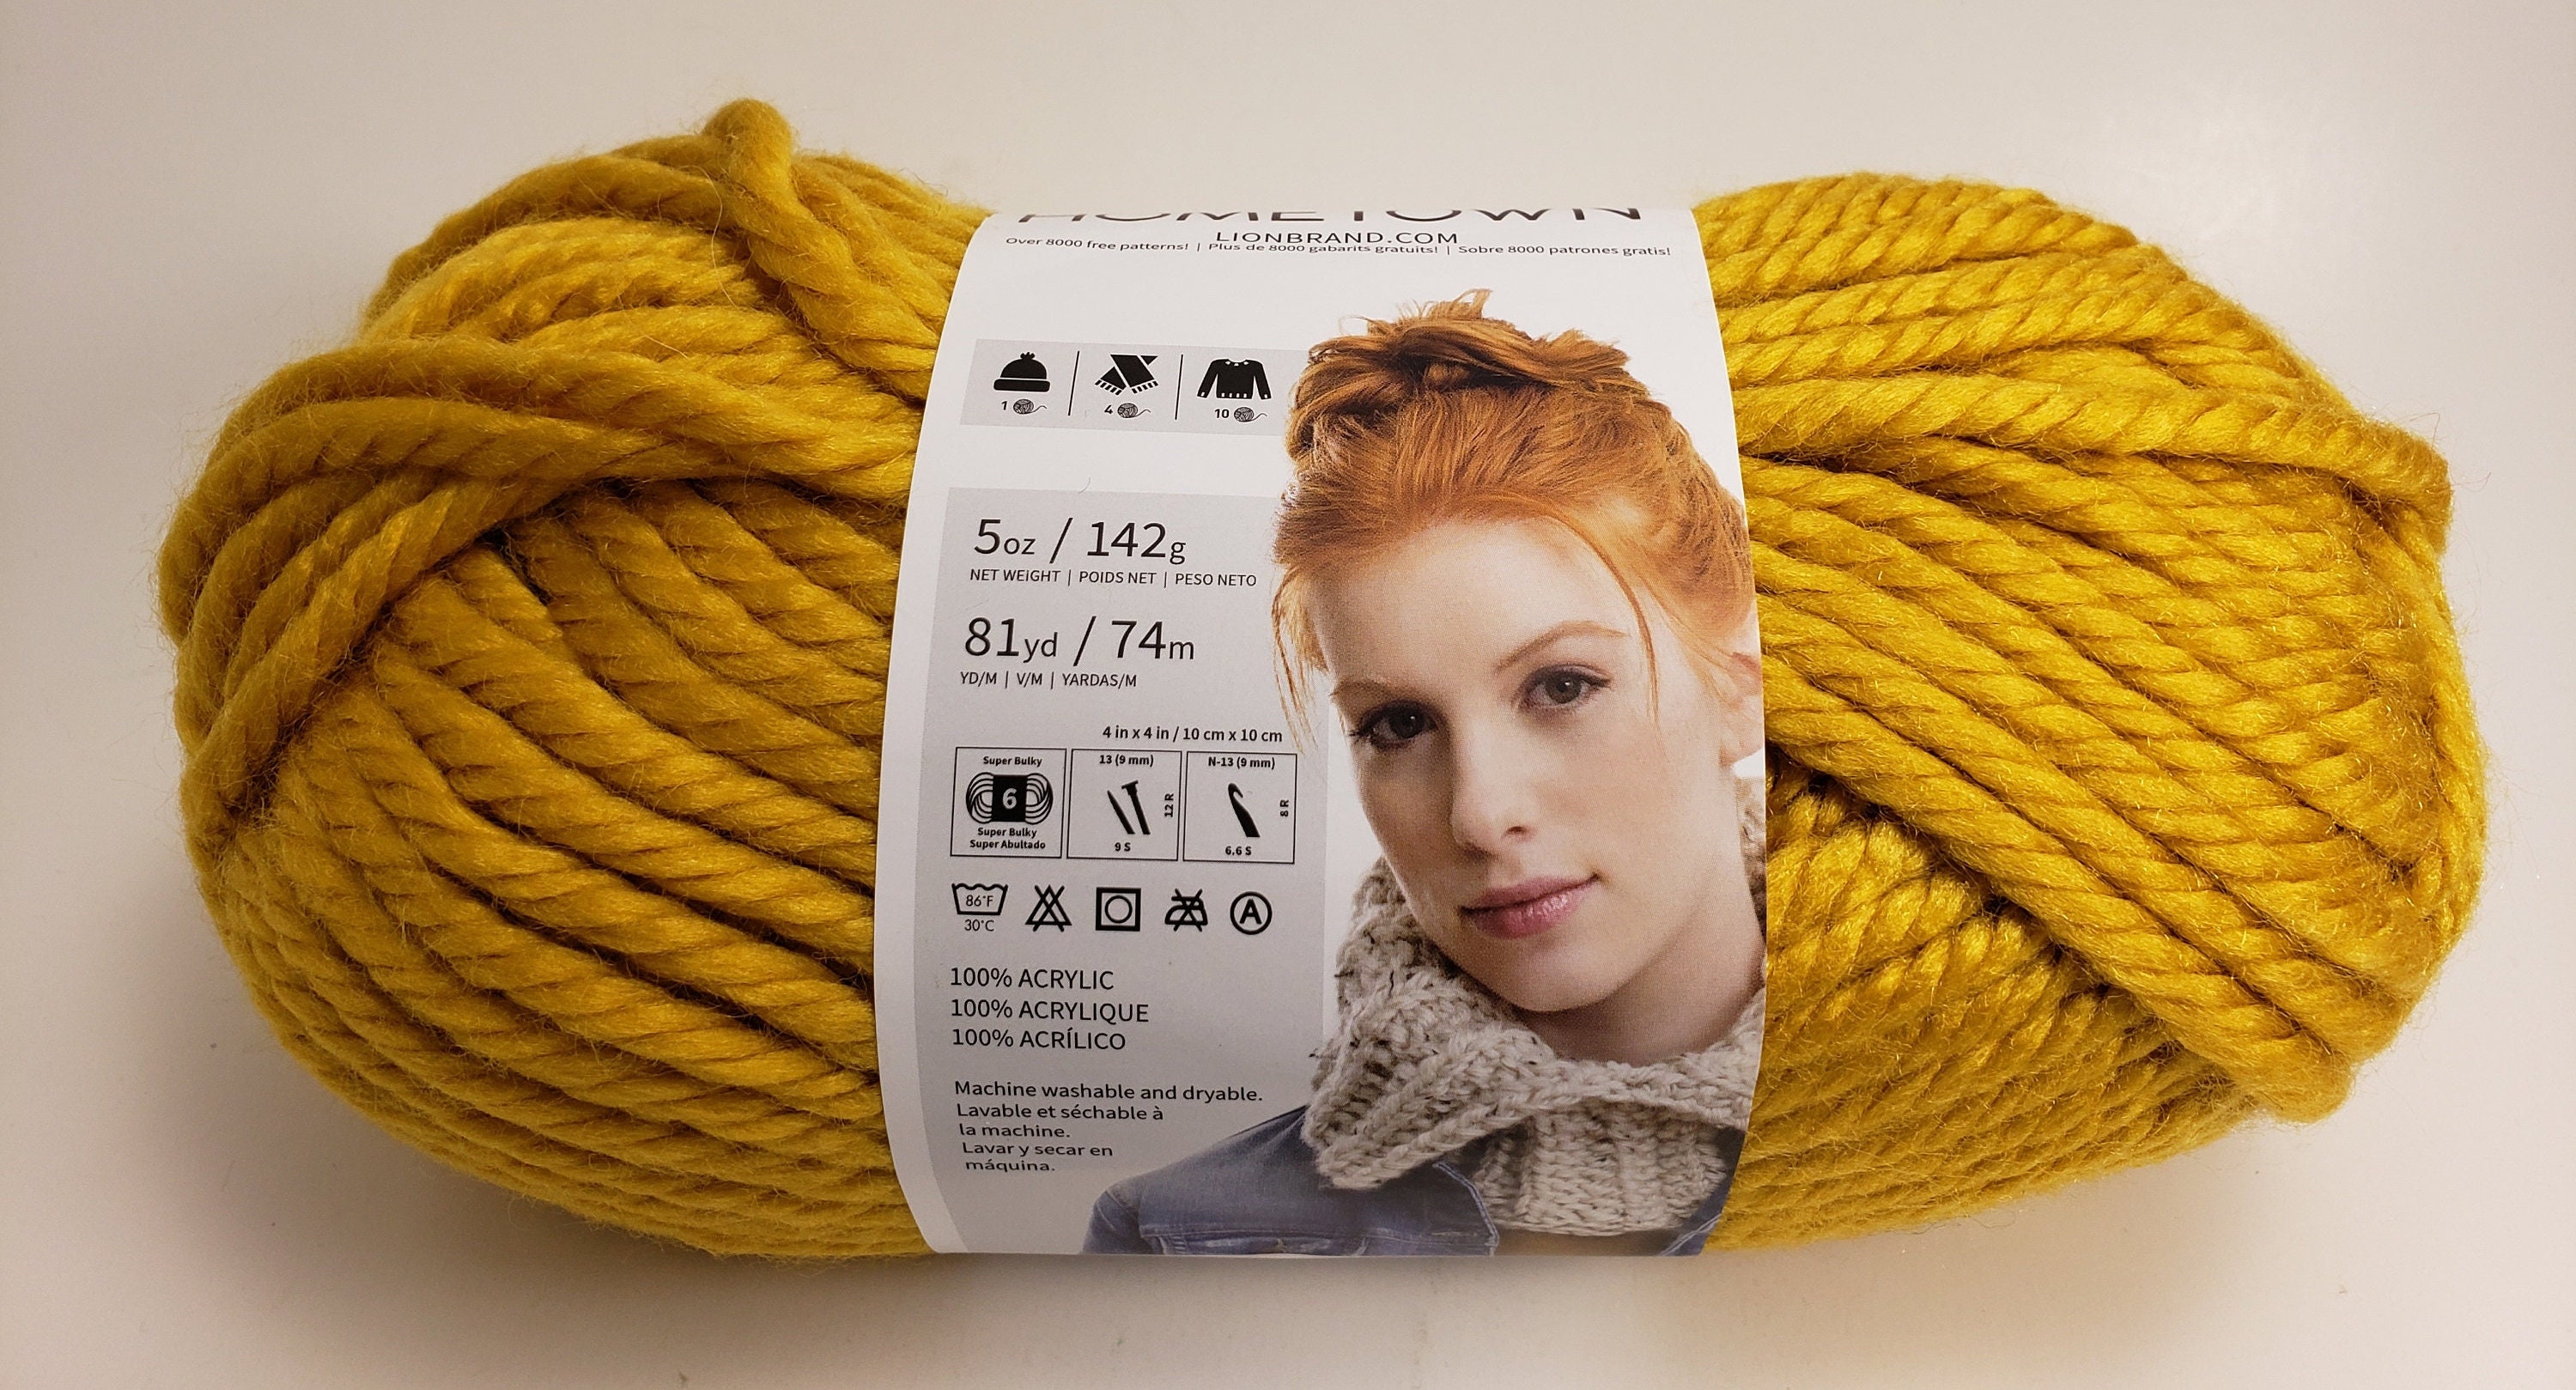 Lot of 2 Lion Brand Hometown Yarn Madison Mustard Color# 159 Lot#632867 NEW